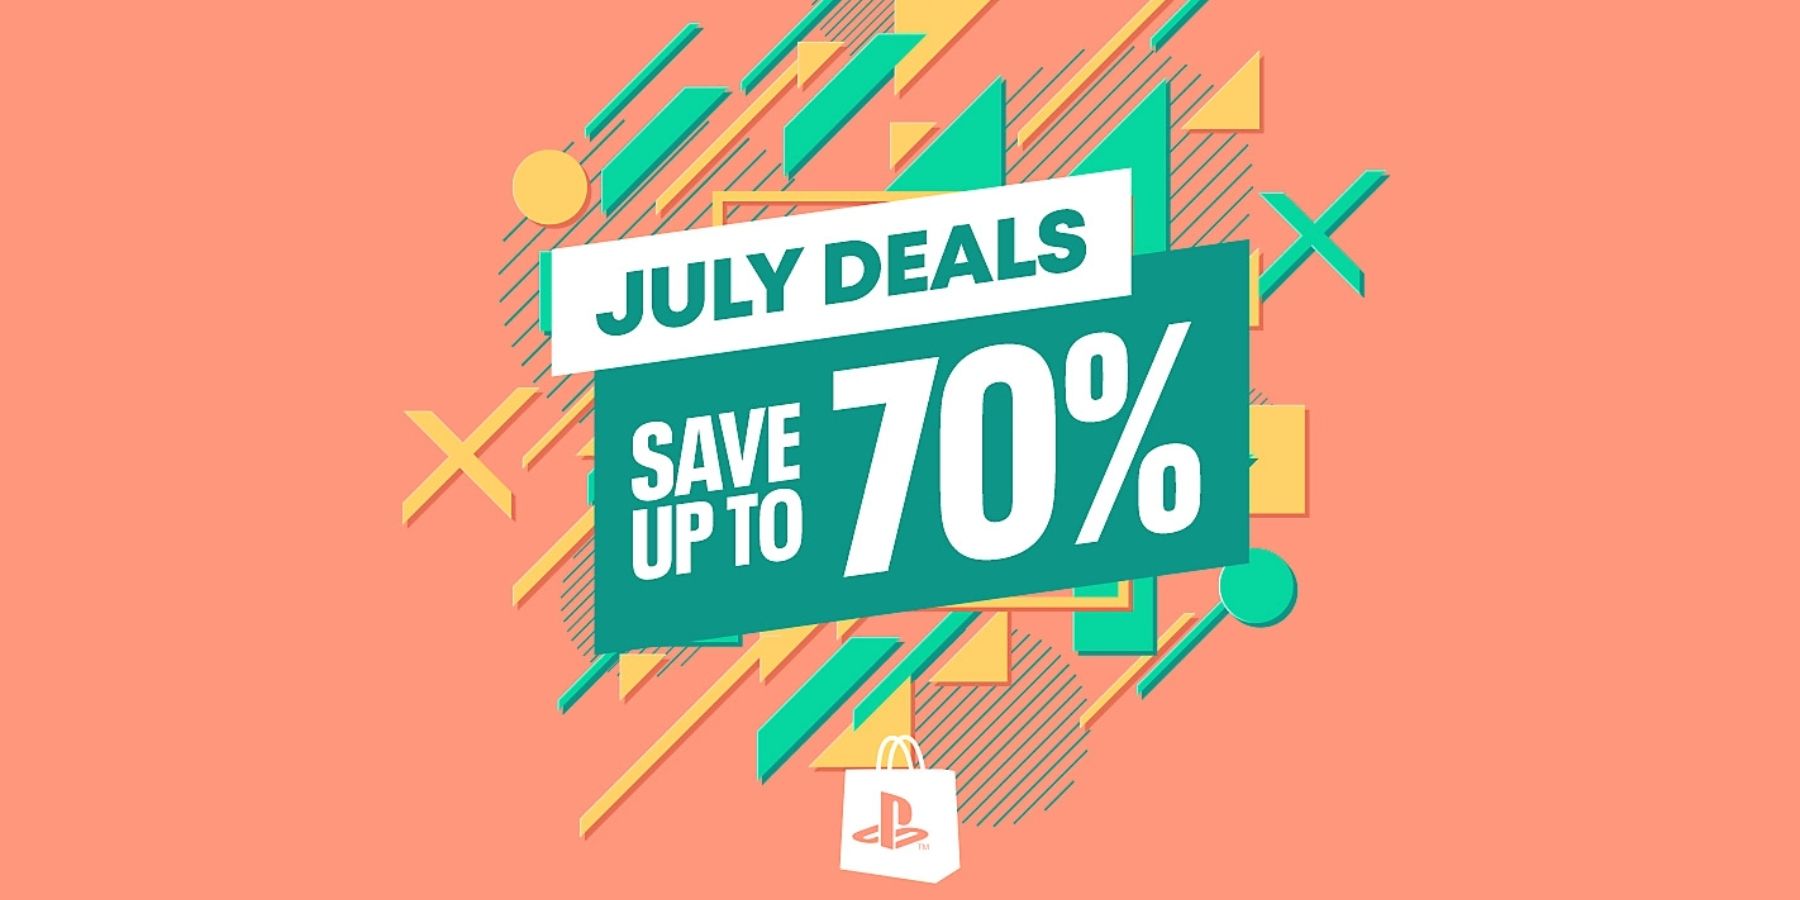 Best PlayStation Deals In June 2021: PS5 And PS4 Deals, Sales, And Prices -  GameSpot